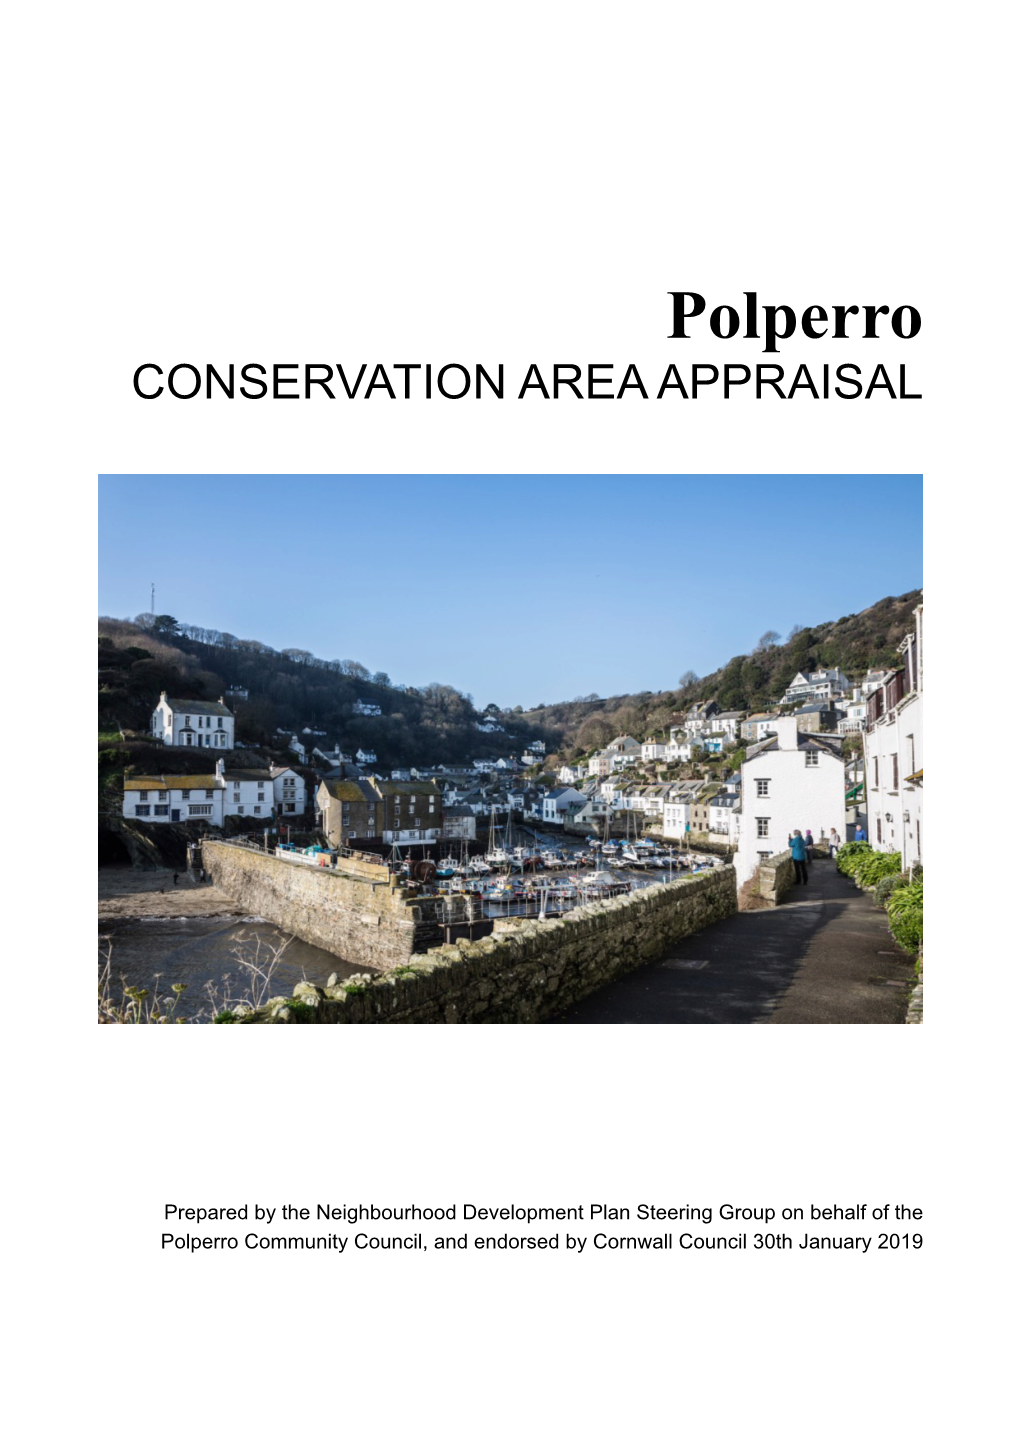 Polperro Conservation Area Appraisal, Updated 2019